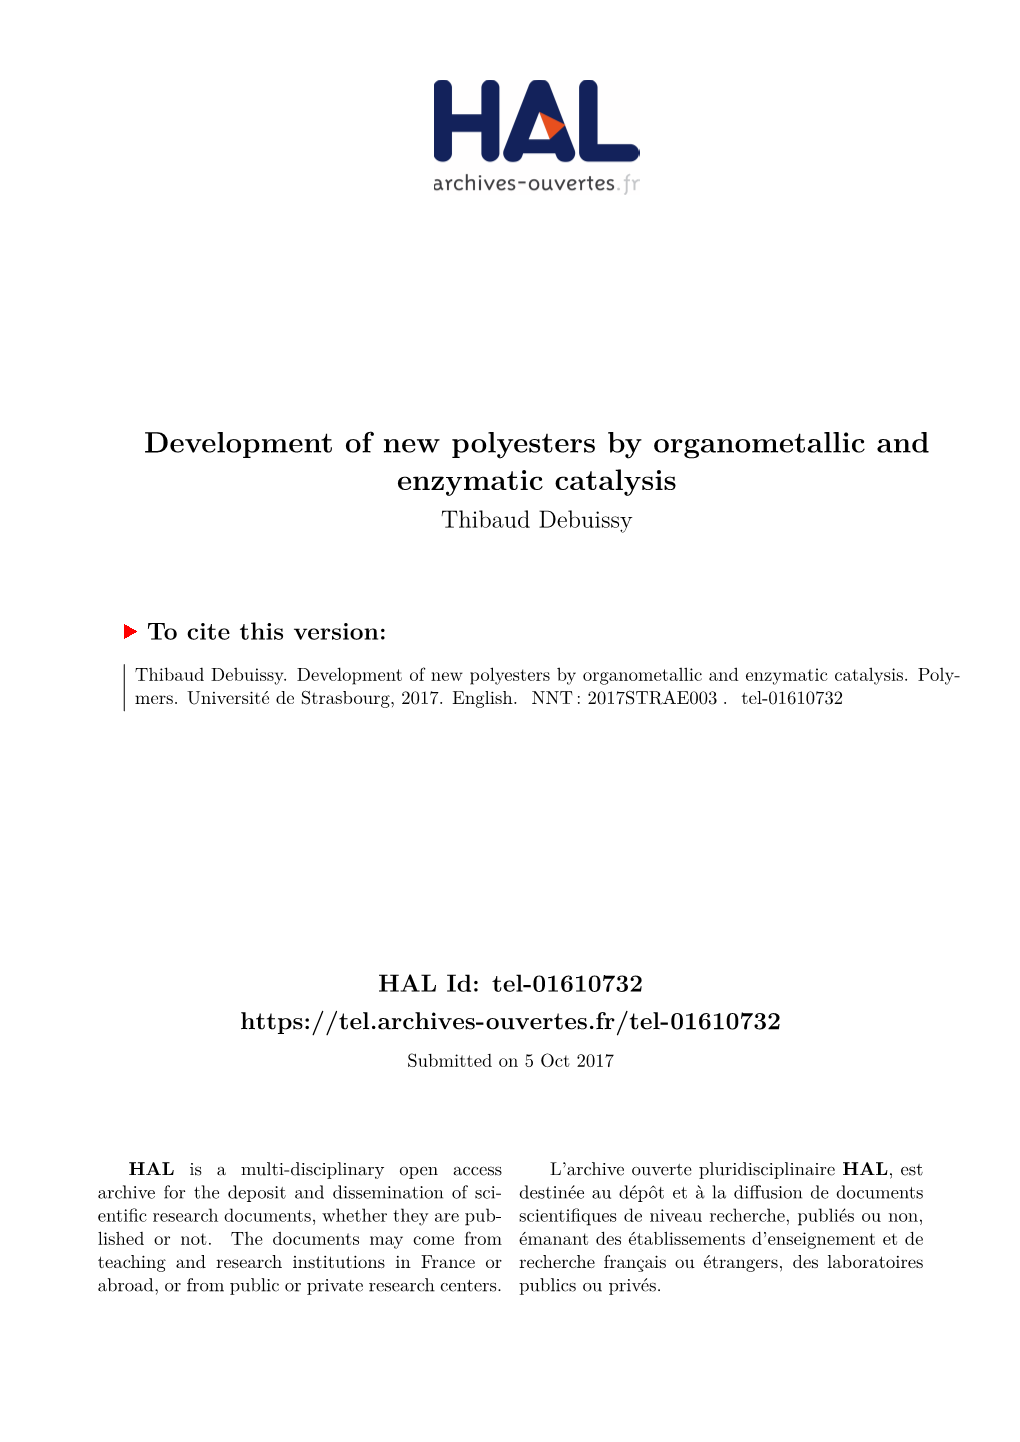 Development of New Polyesters by Organometallic and Enzymatic Catalysis Thibaud Debuissy